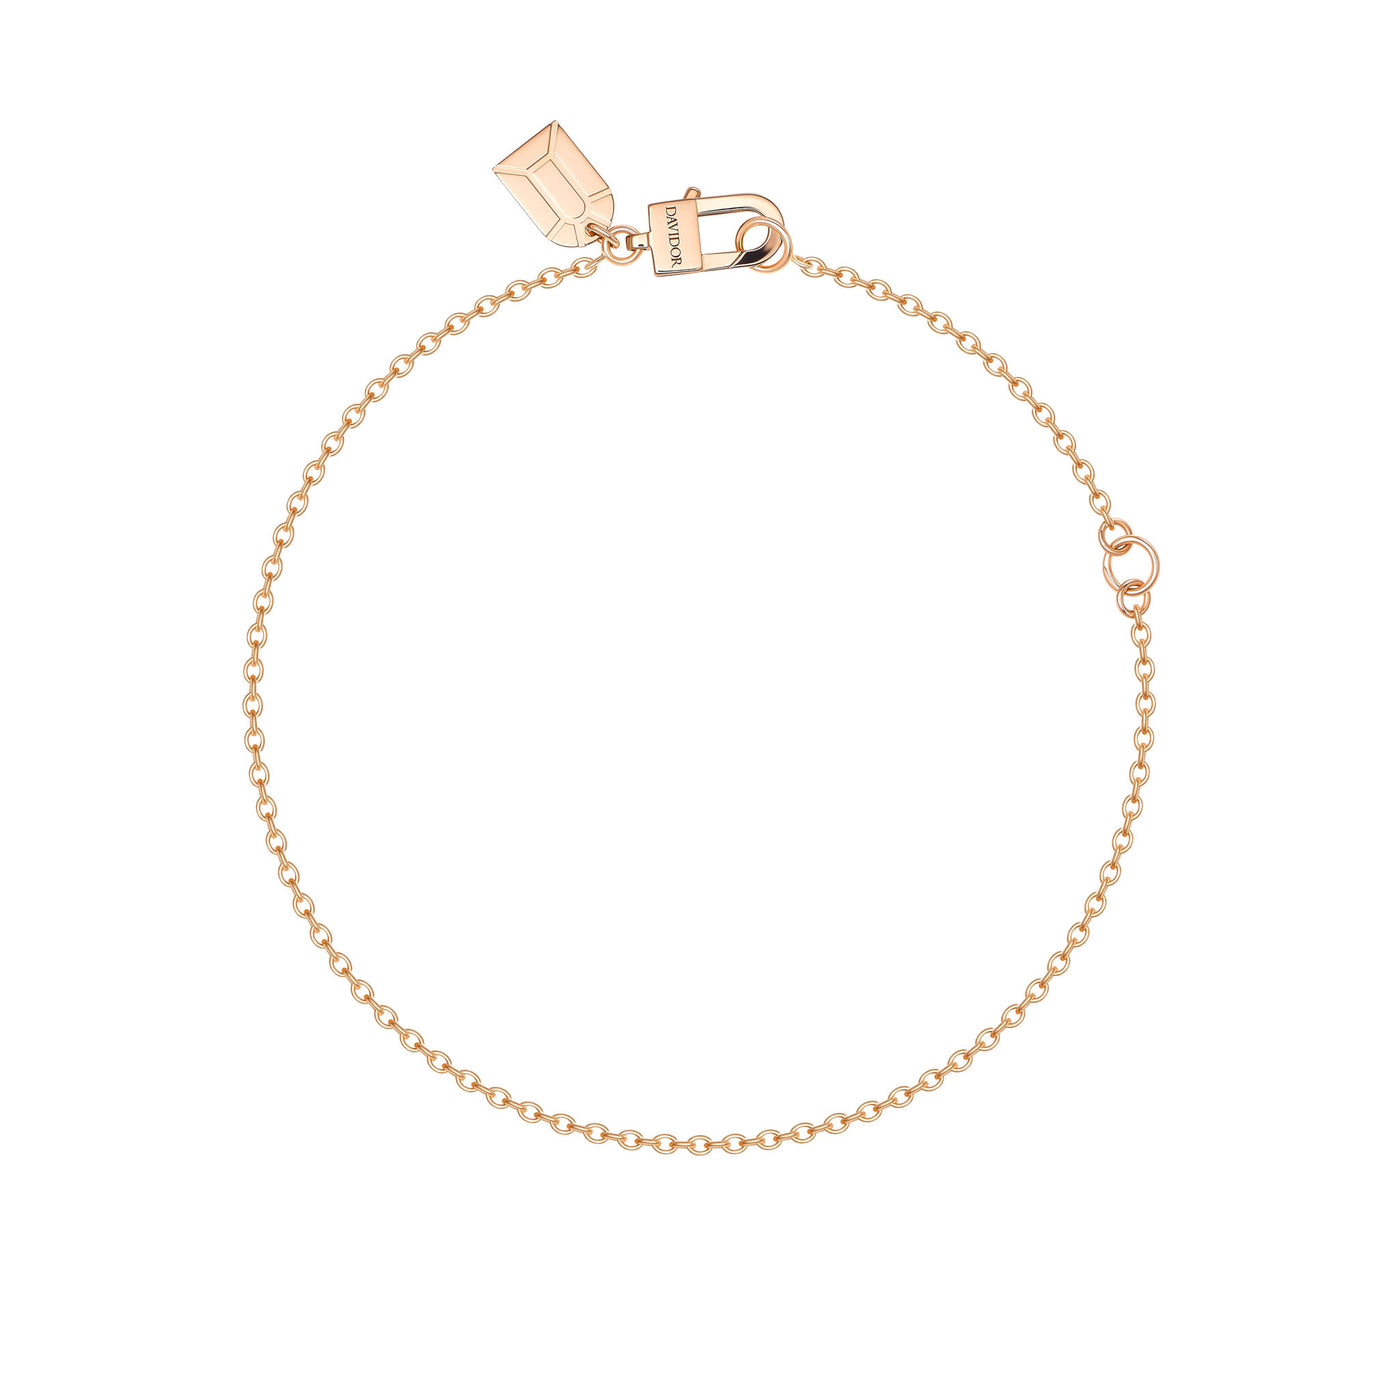 DAVIDOR Chain Bracelet with Signature Arch ID Tag and Arch Clasp - DAVIDOR